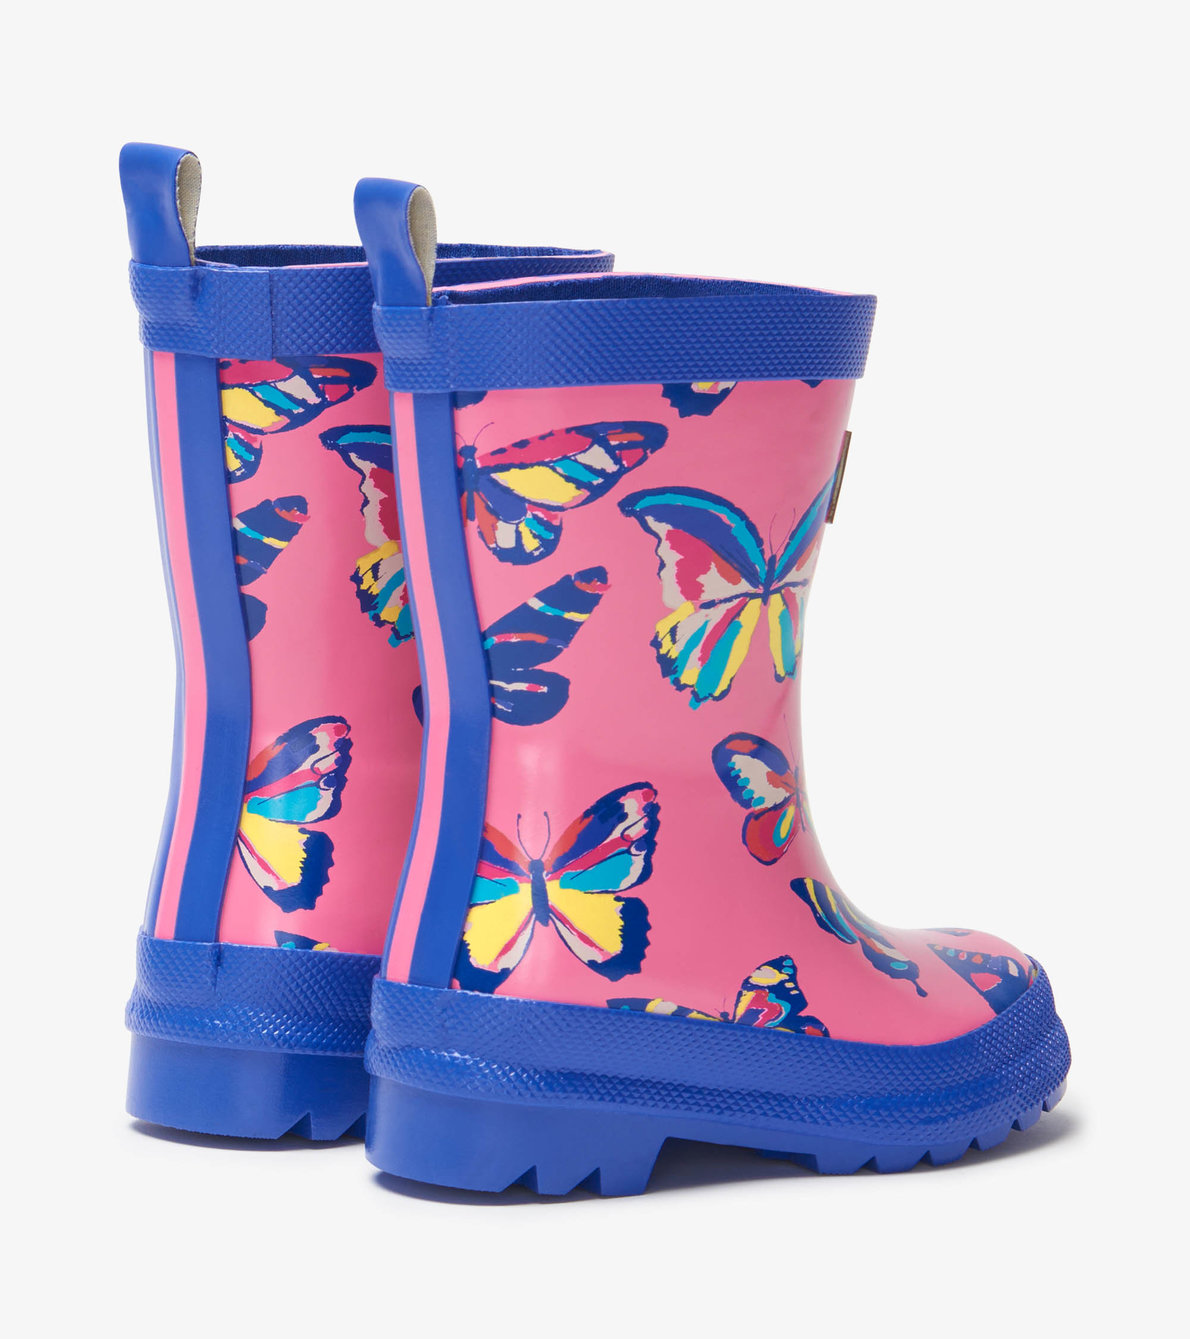 View larger image of My 1st Wellies - Vibrant Butterflies